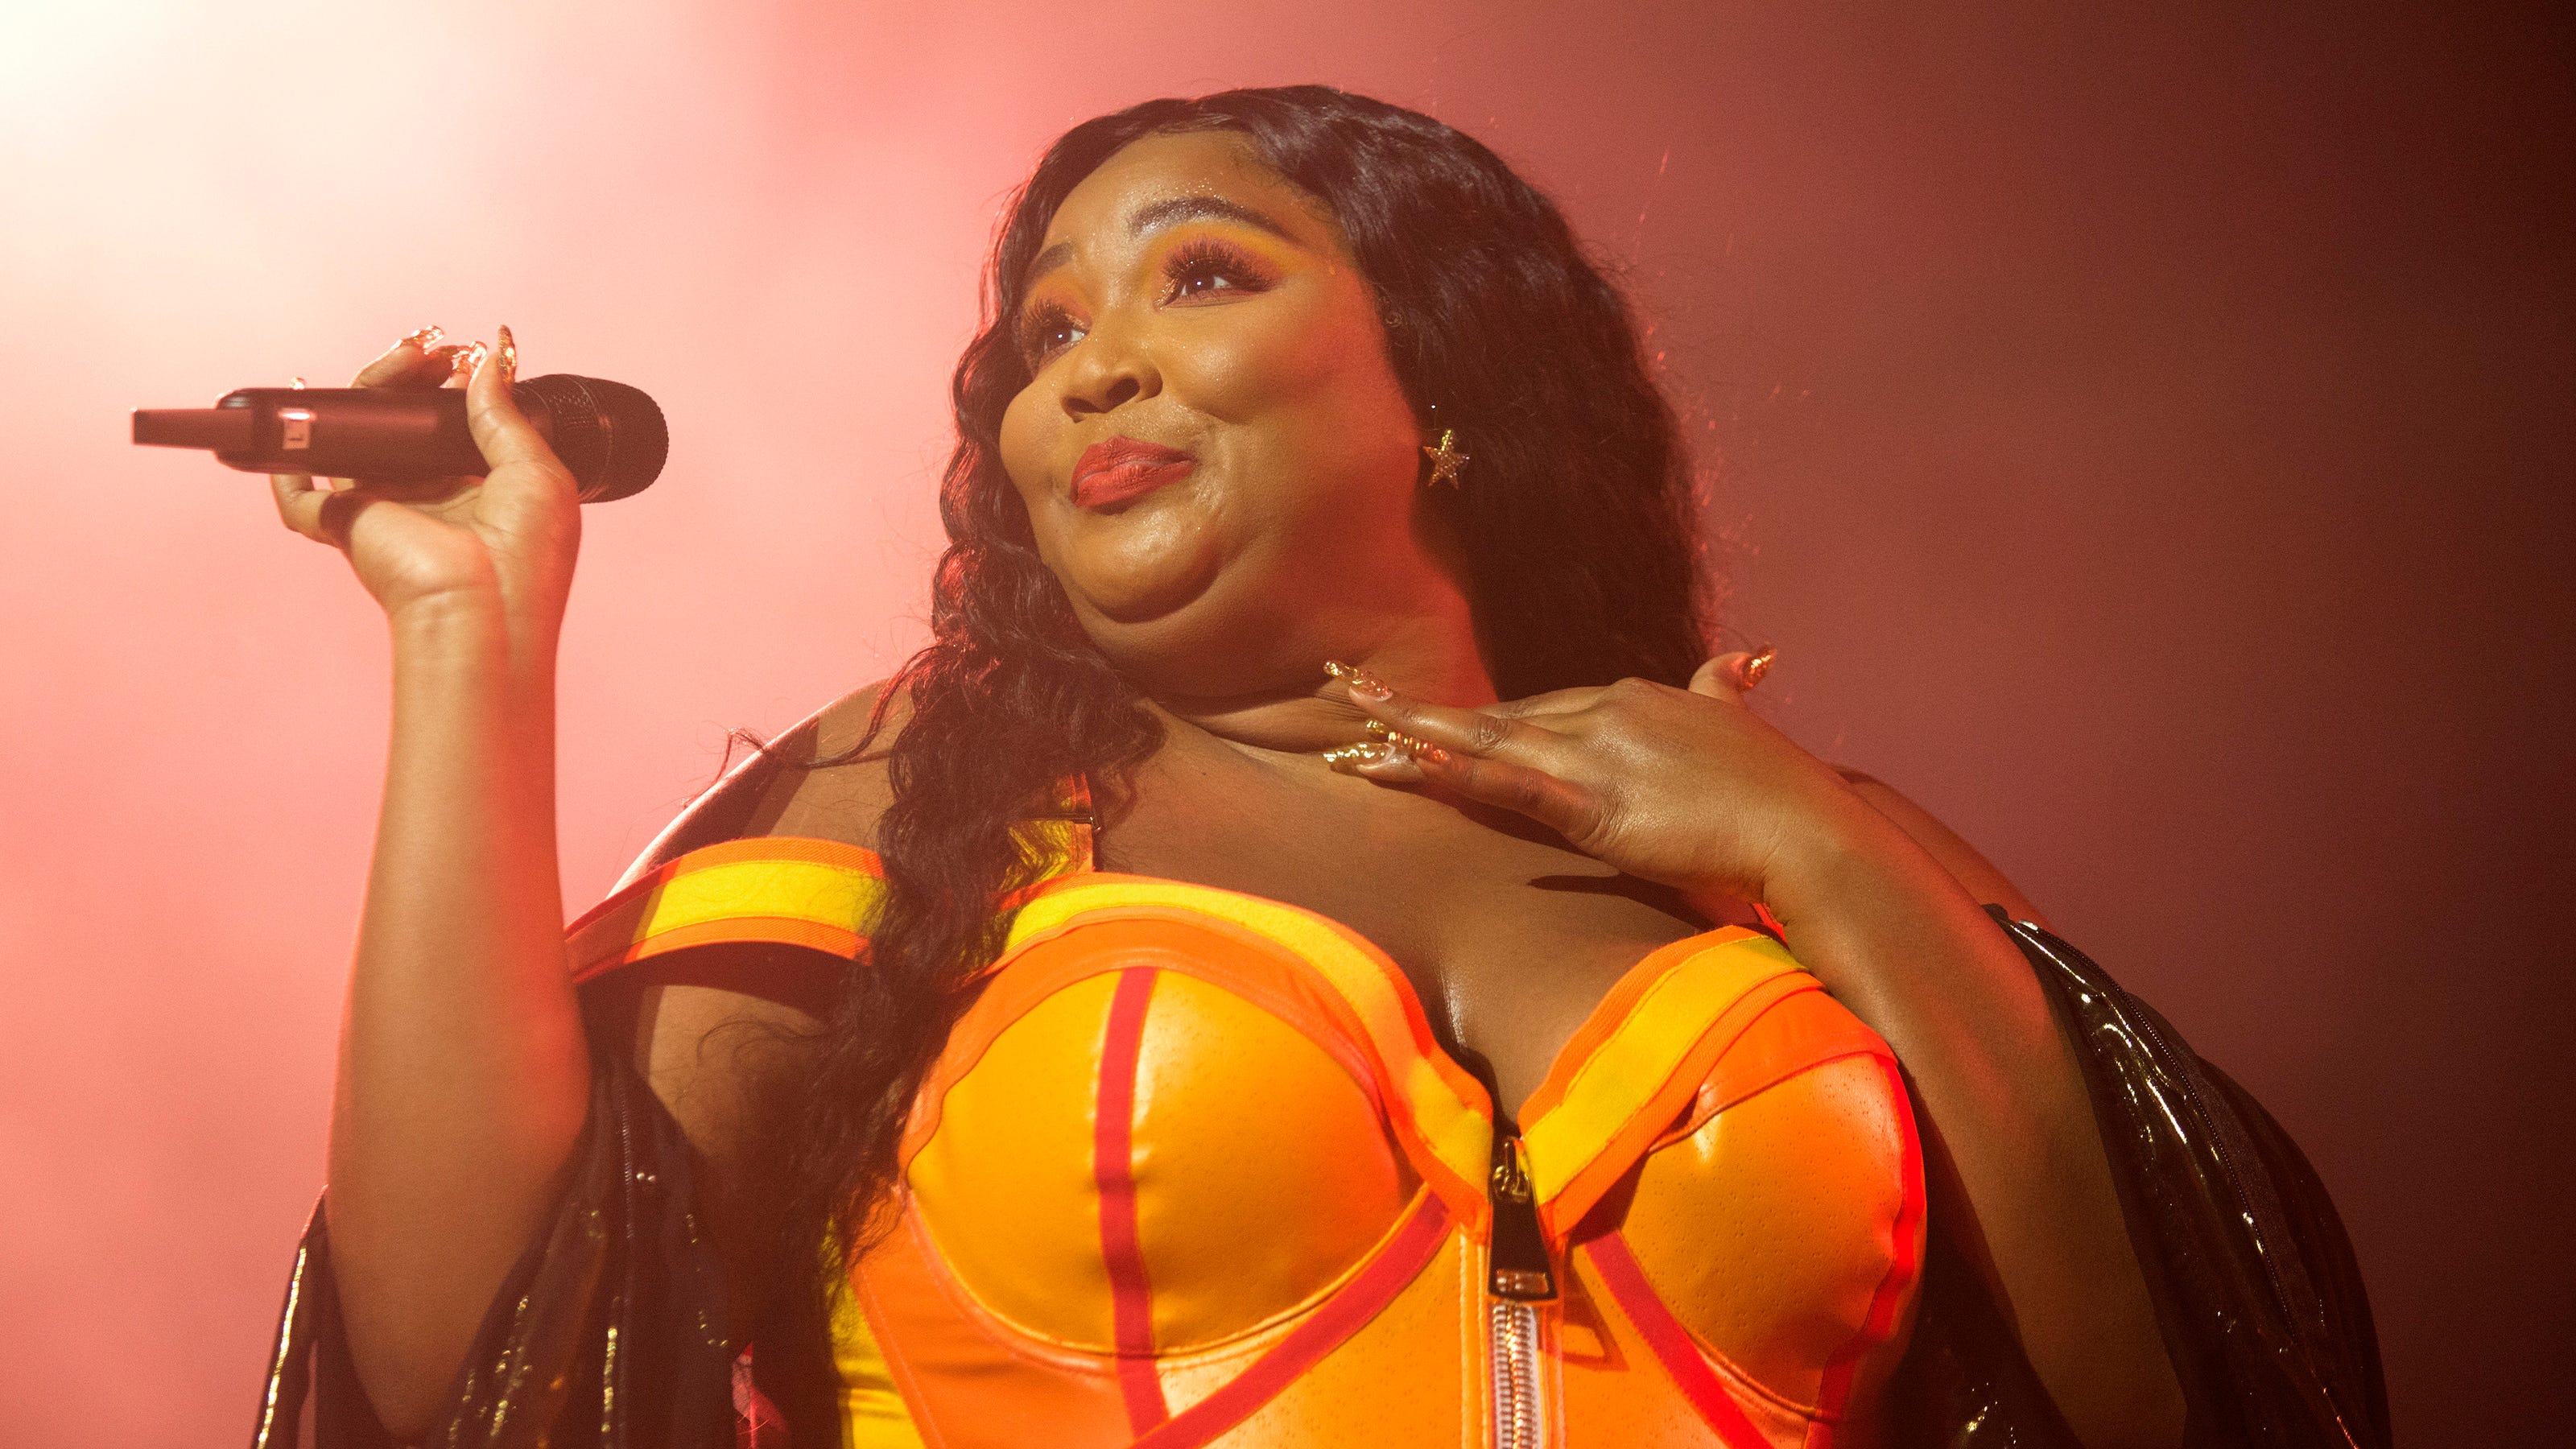 Lizzo says lack of media representation took psychological toll on her